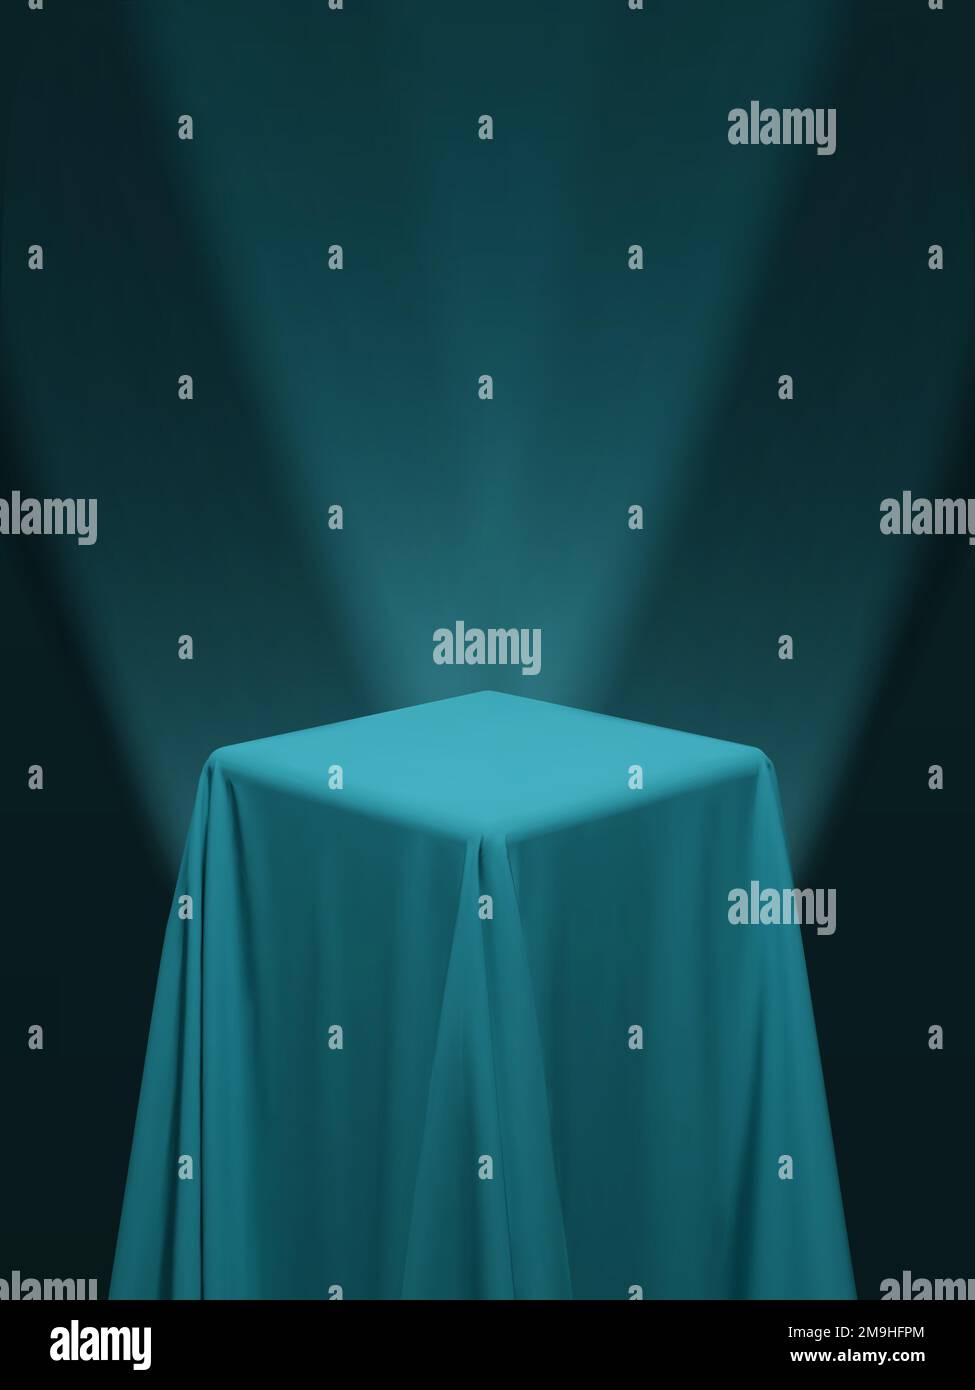 Teal green blue fabric covering a cube or a table vector illustration Stock Vector